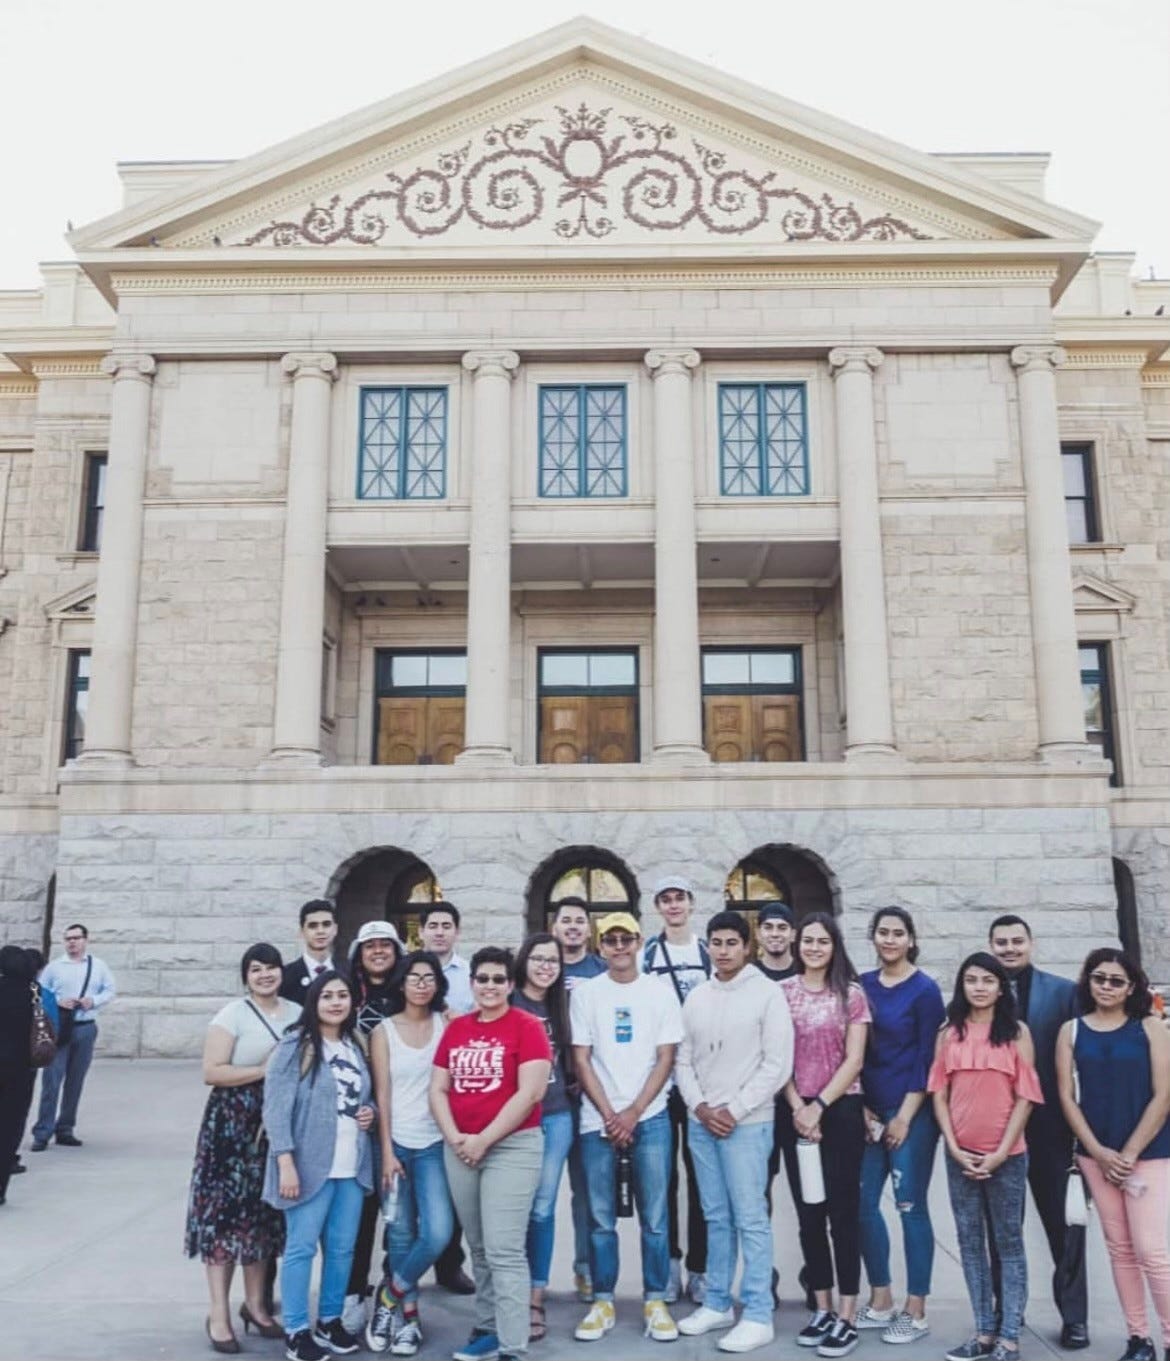 Community group Aliento rallied outside the Arizona Capitol on April 9, 2018, the day that the Arizona Supreme Court ruled that DACA recipients were not eligible for in-state tuition.